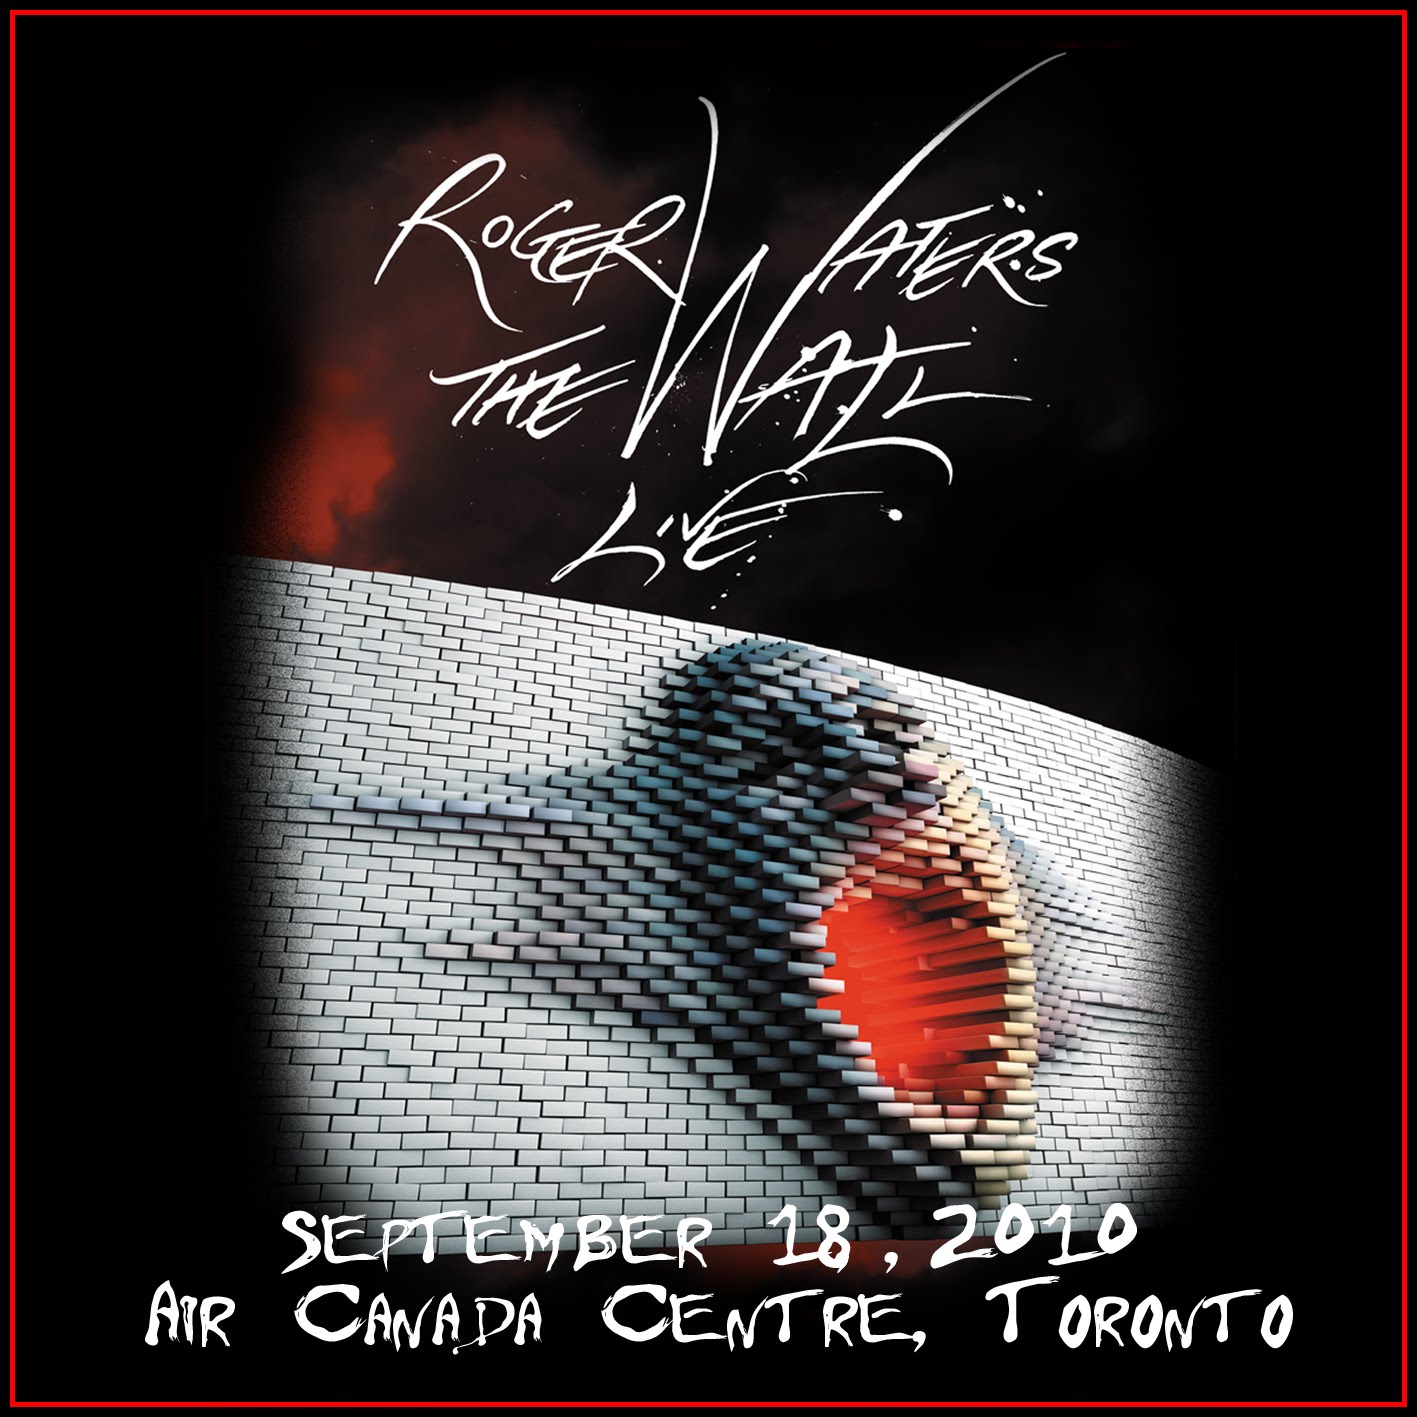 The Clock That Went Backwards Again: Roger Waters - 2010 - Toronto Run